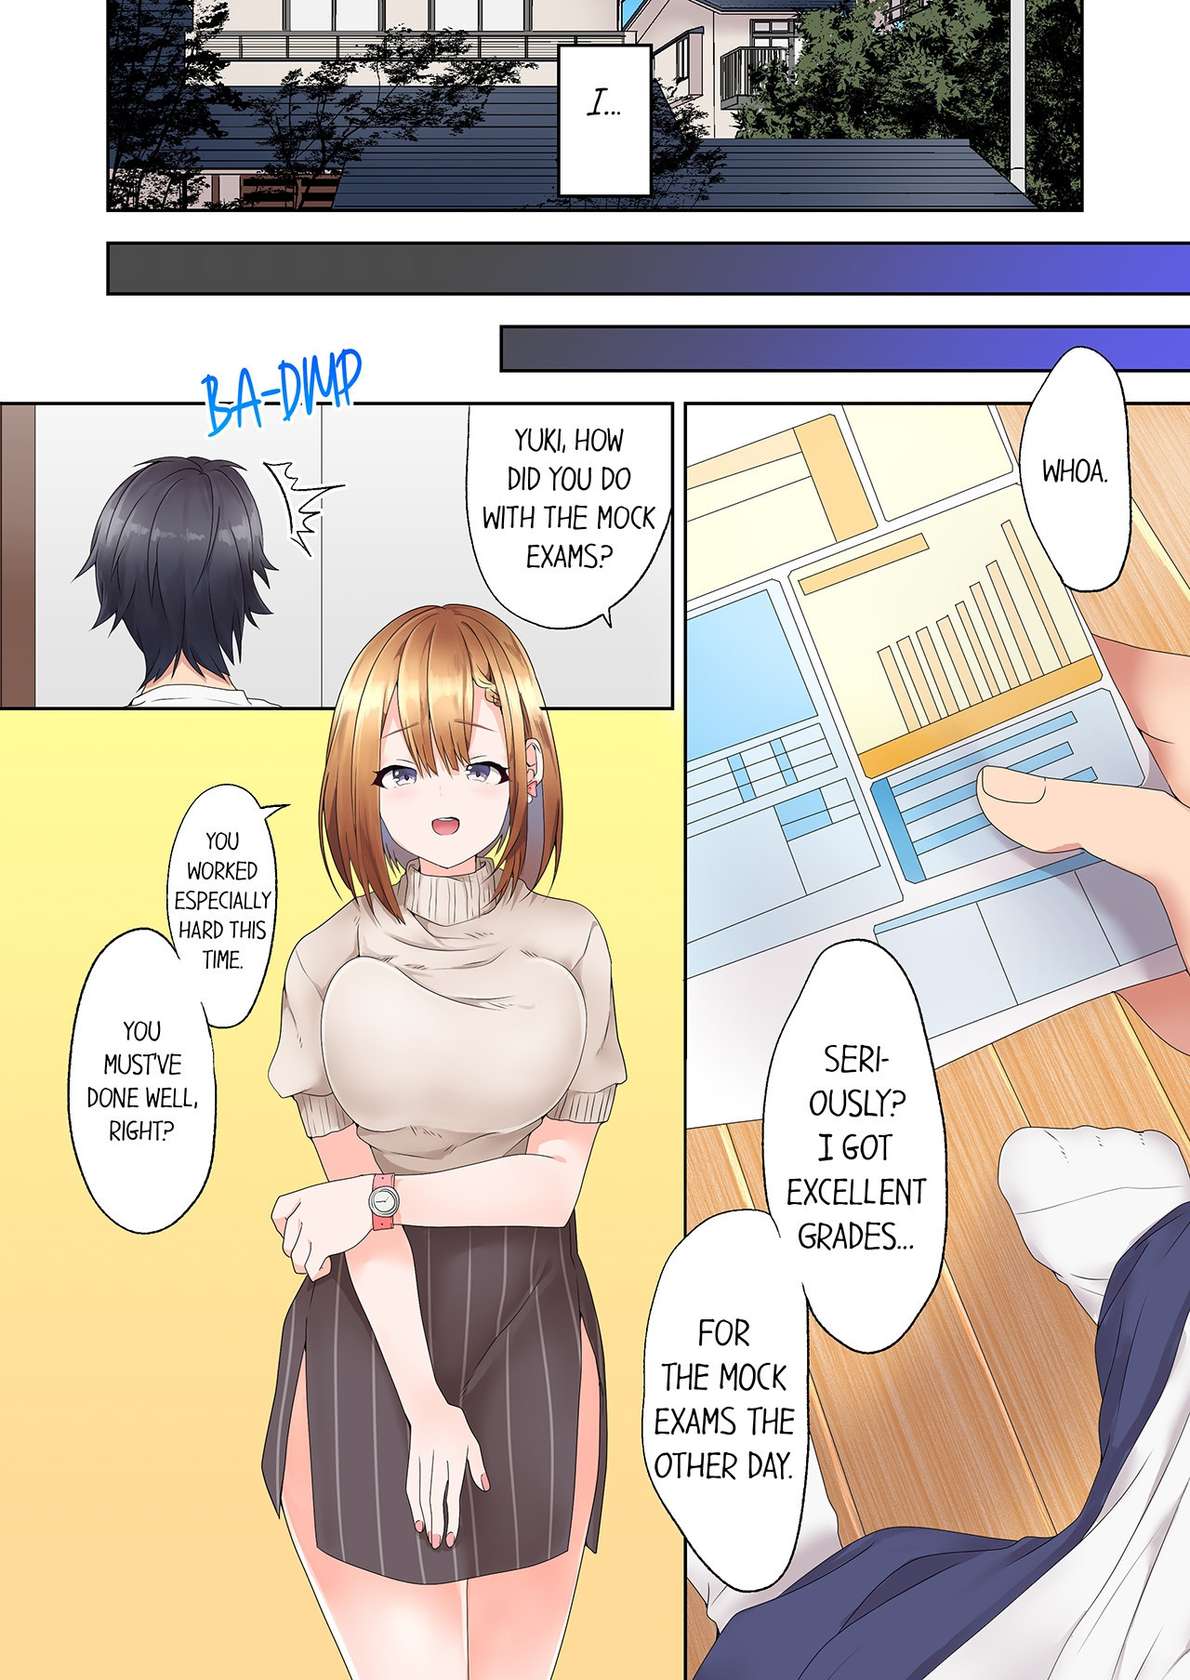 [Himino] Katei Kyoushi no Yuuwaku Sex "Gomu... Nakunaru made Tsukaou ne" 1 | My Private Tutor's Tempting Sex - "Let's Do It To Our Hearts' Content Until We Run Out Of Condoms" 1 [English]